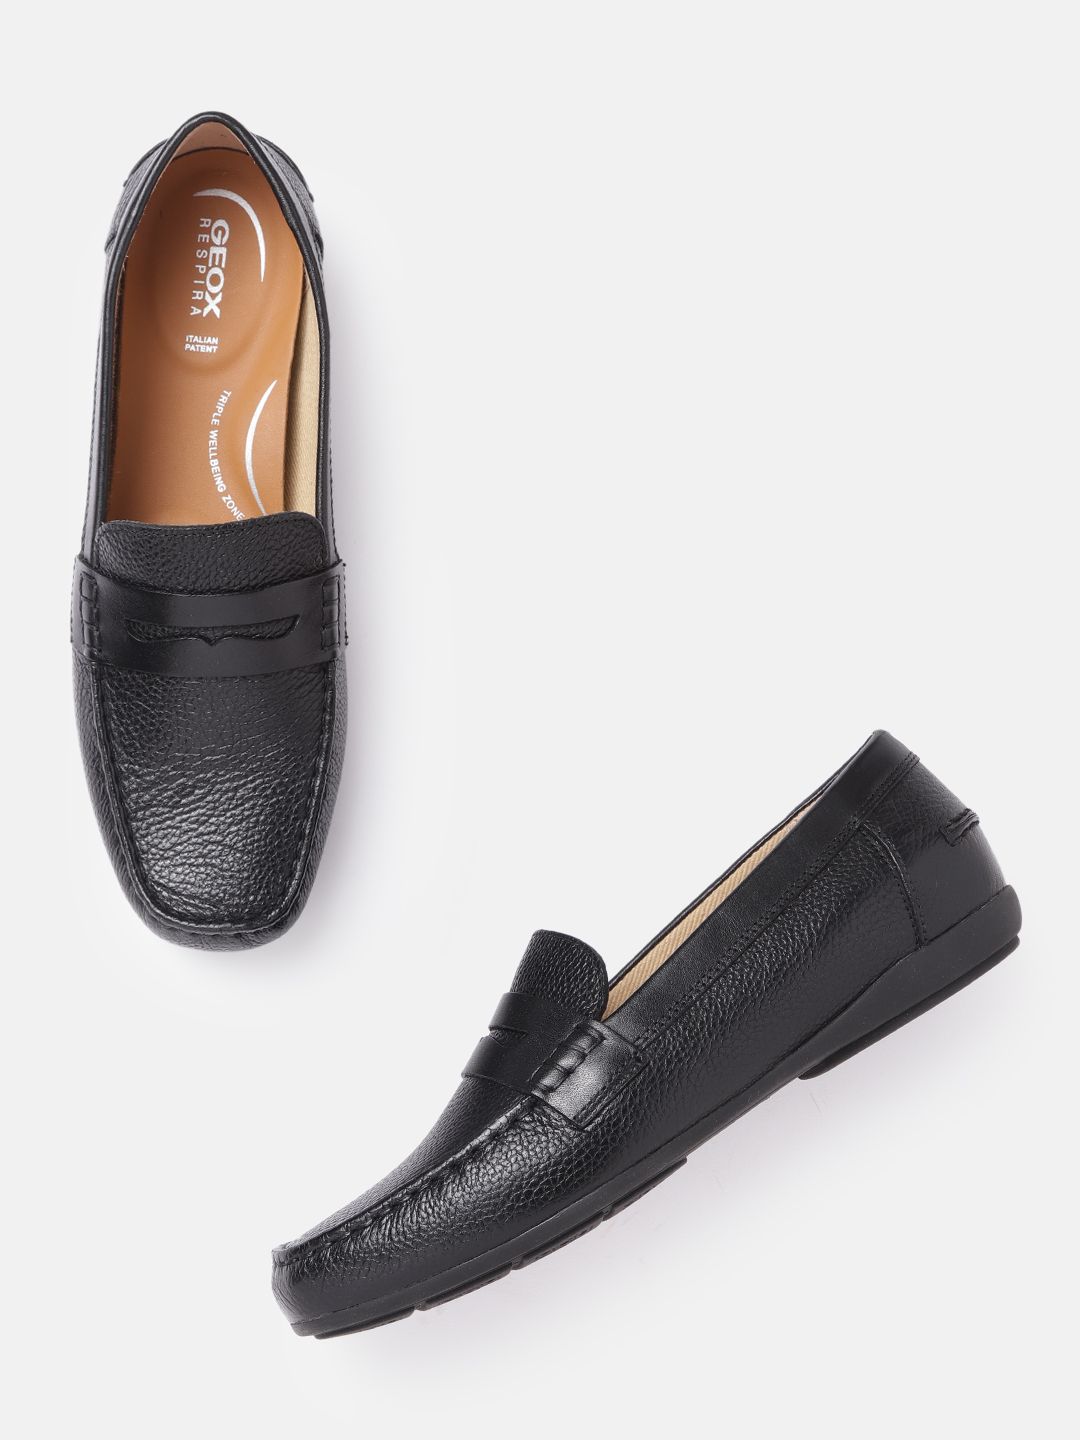 Geox Women Black Textured Leather Loafers Price in India